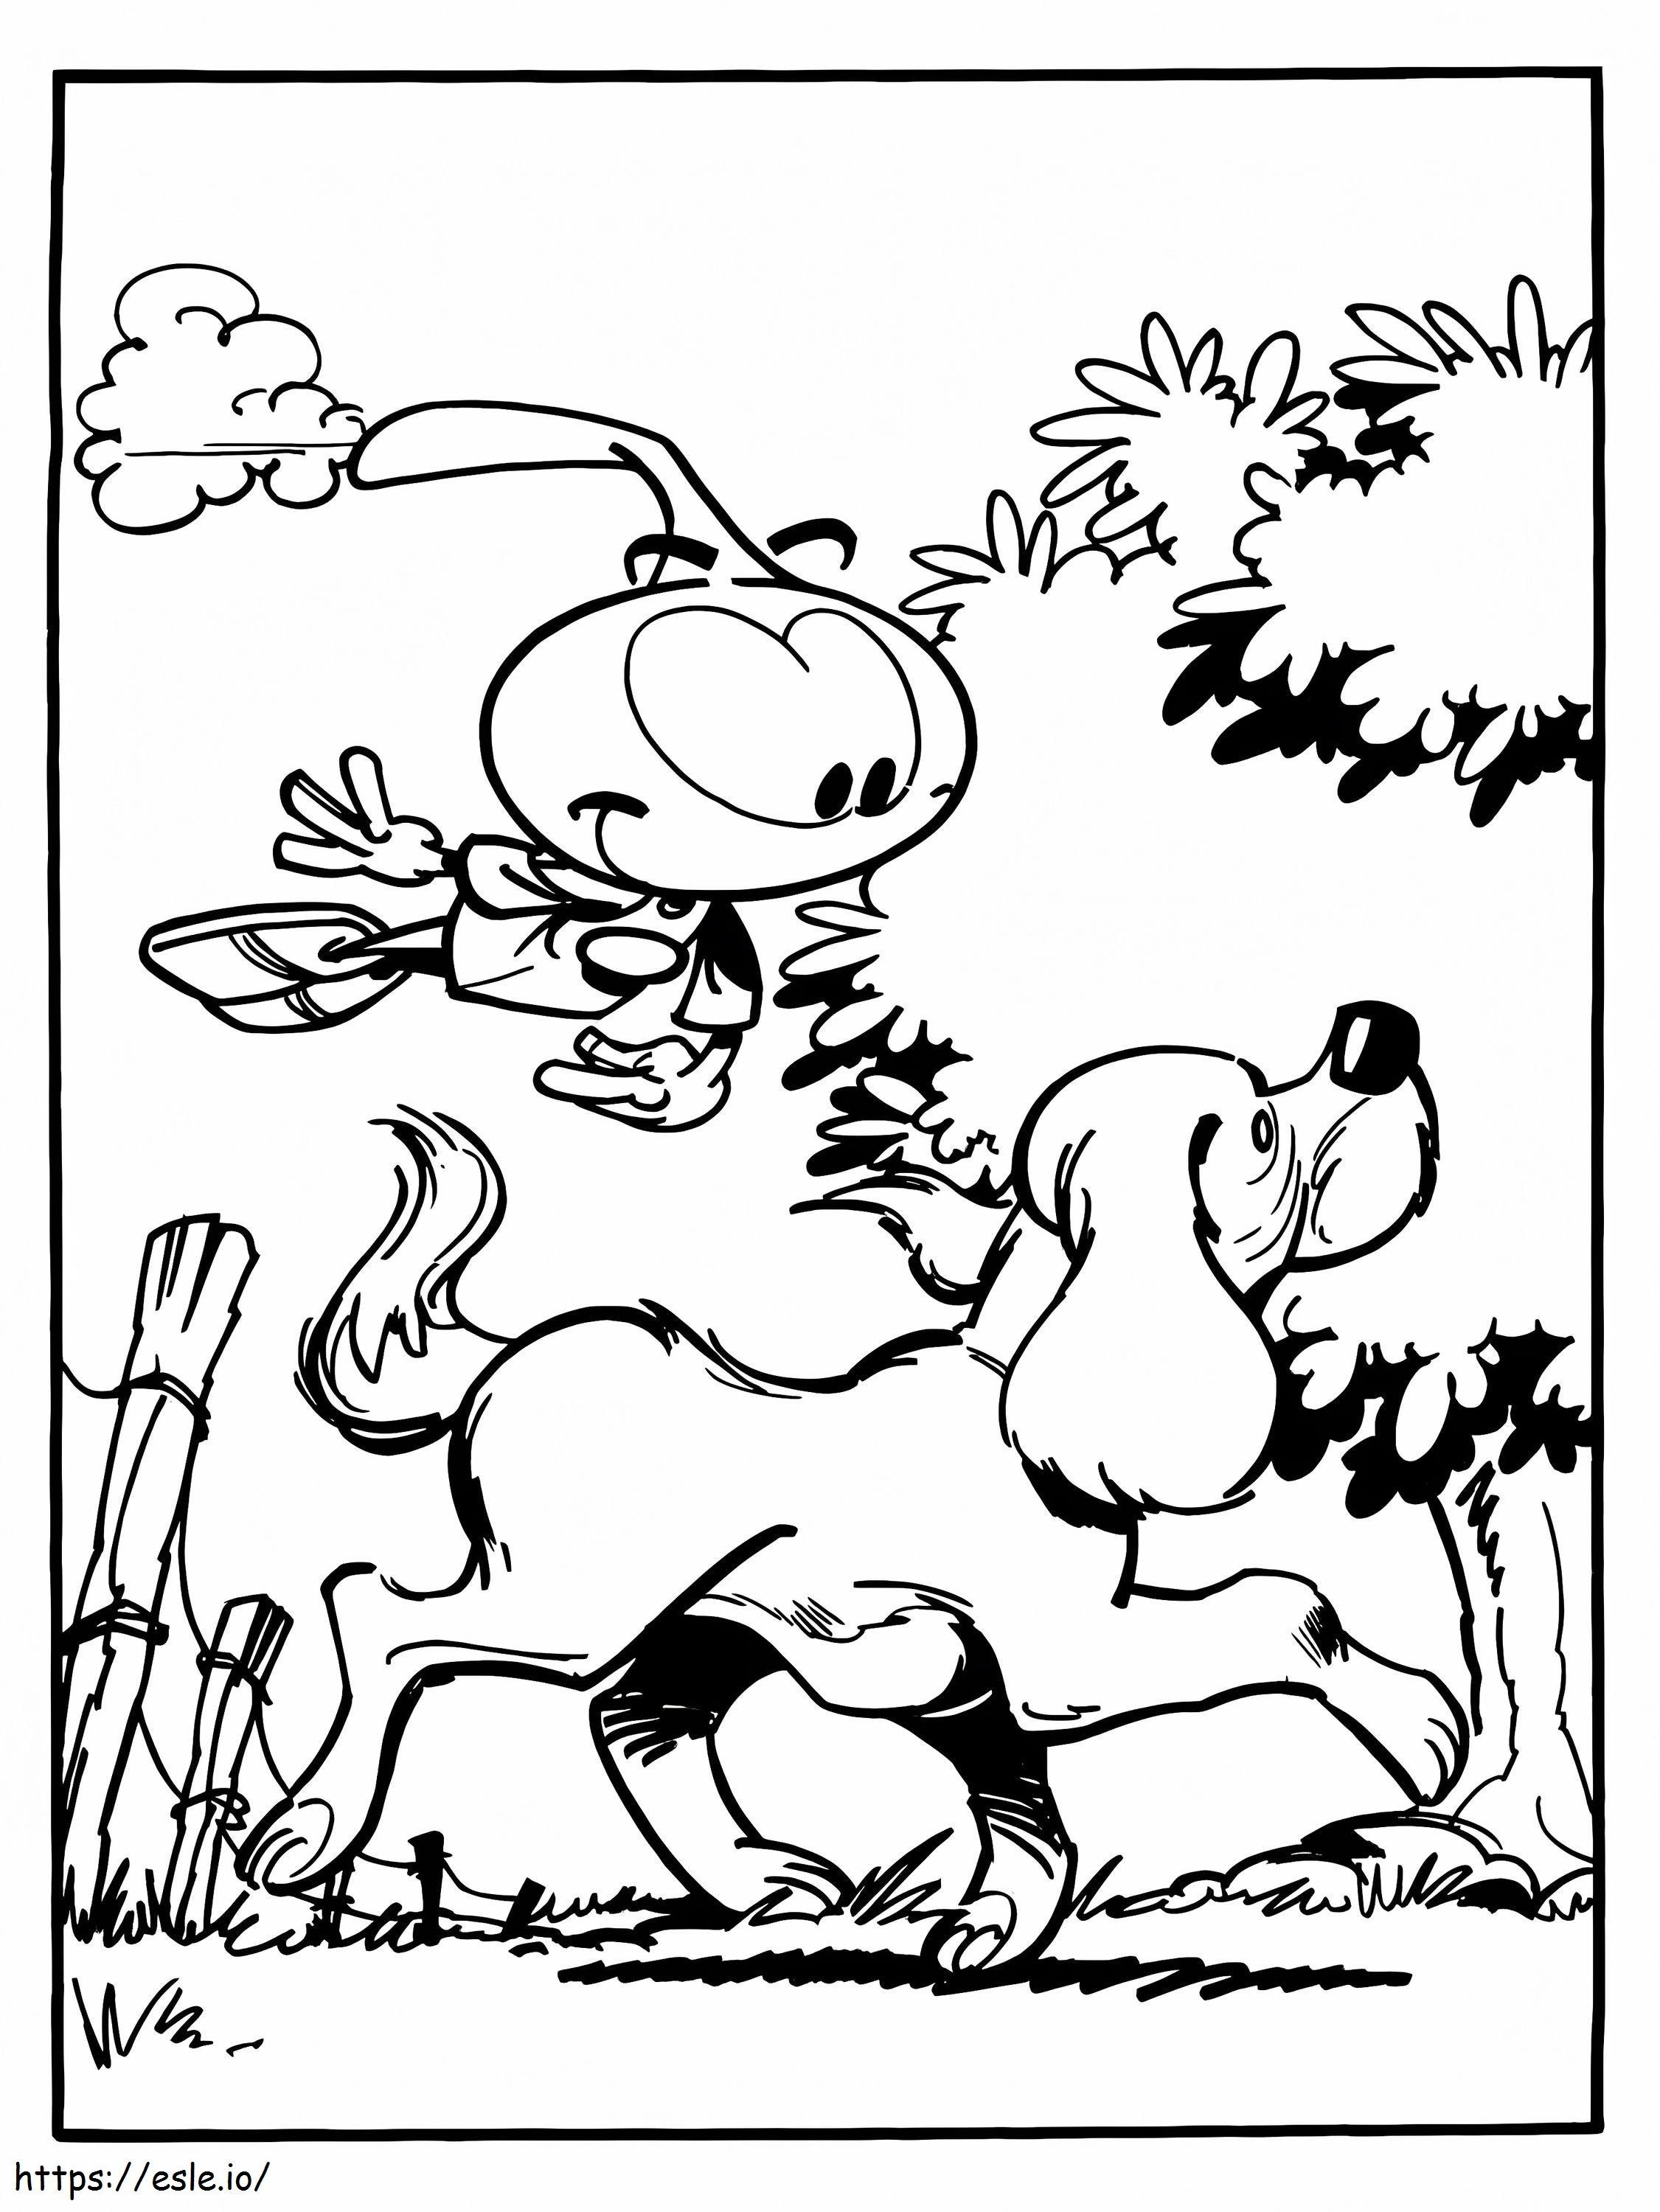 Snorks 5 coloring page